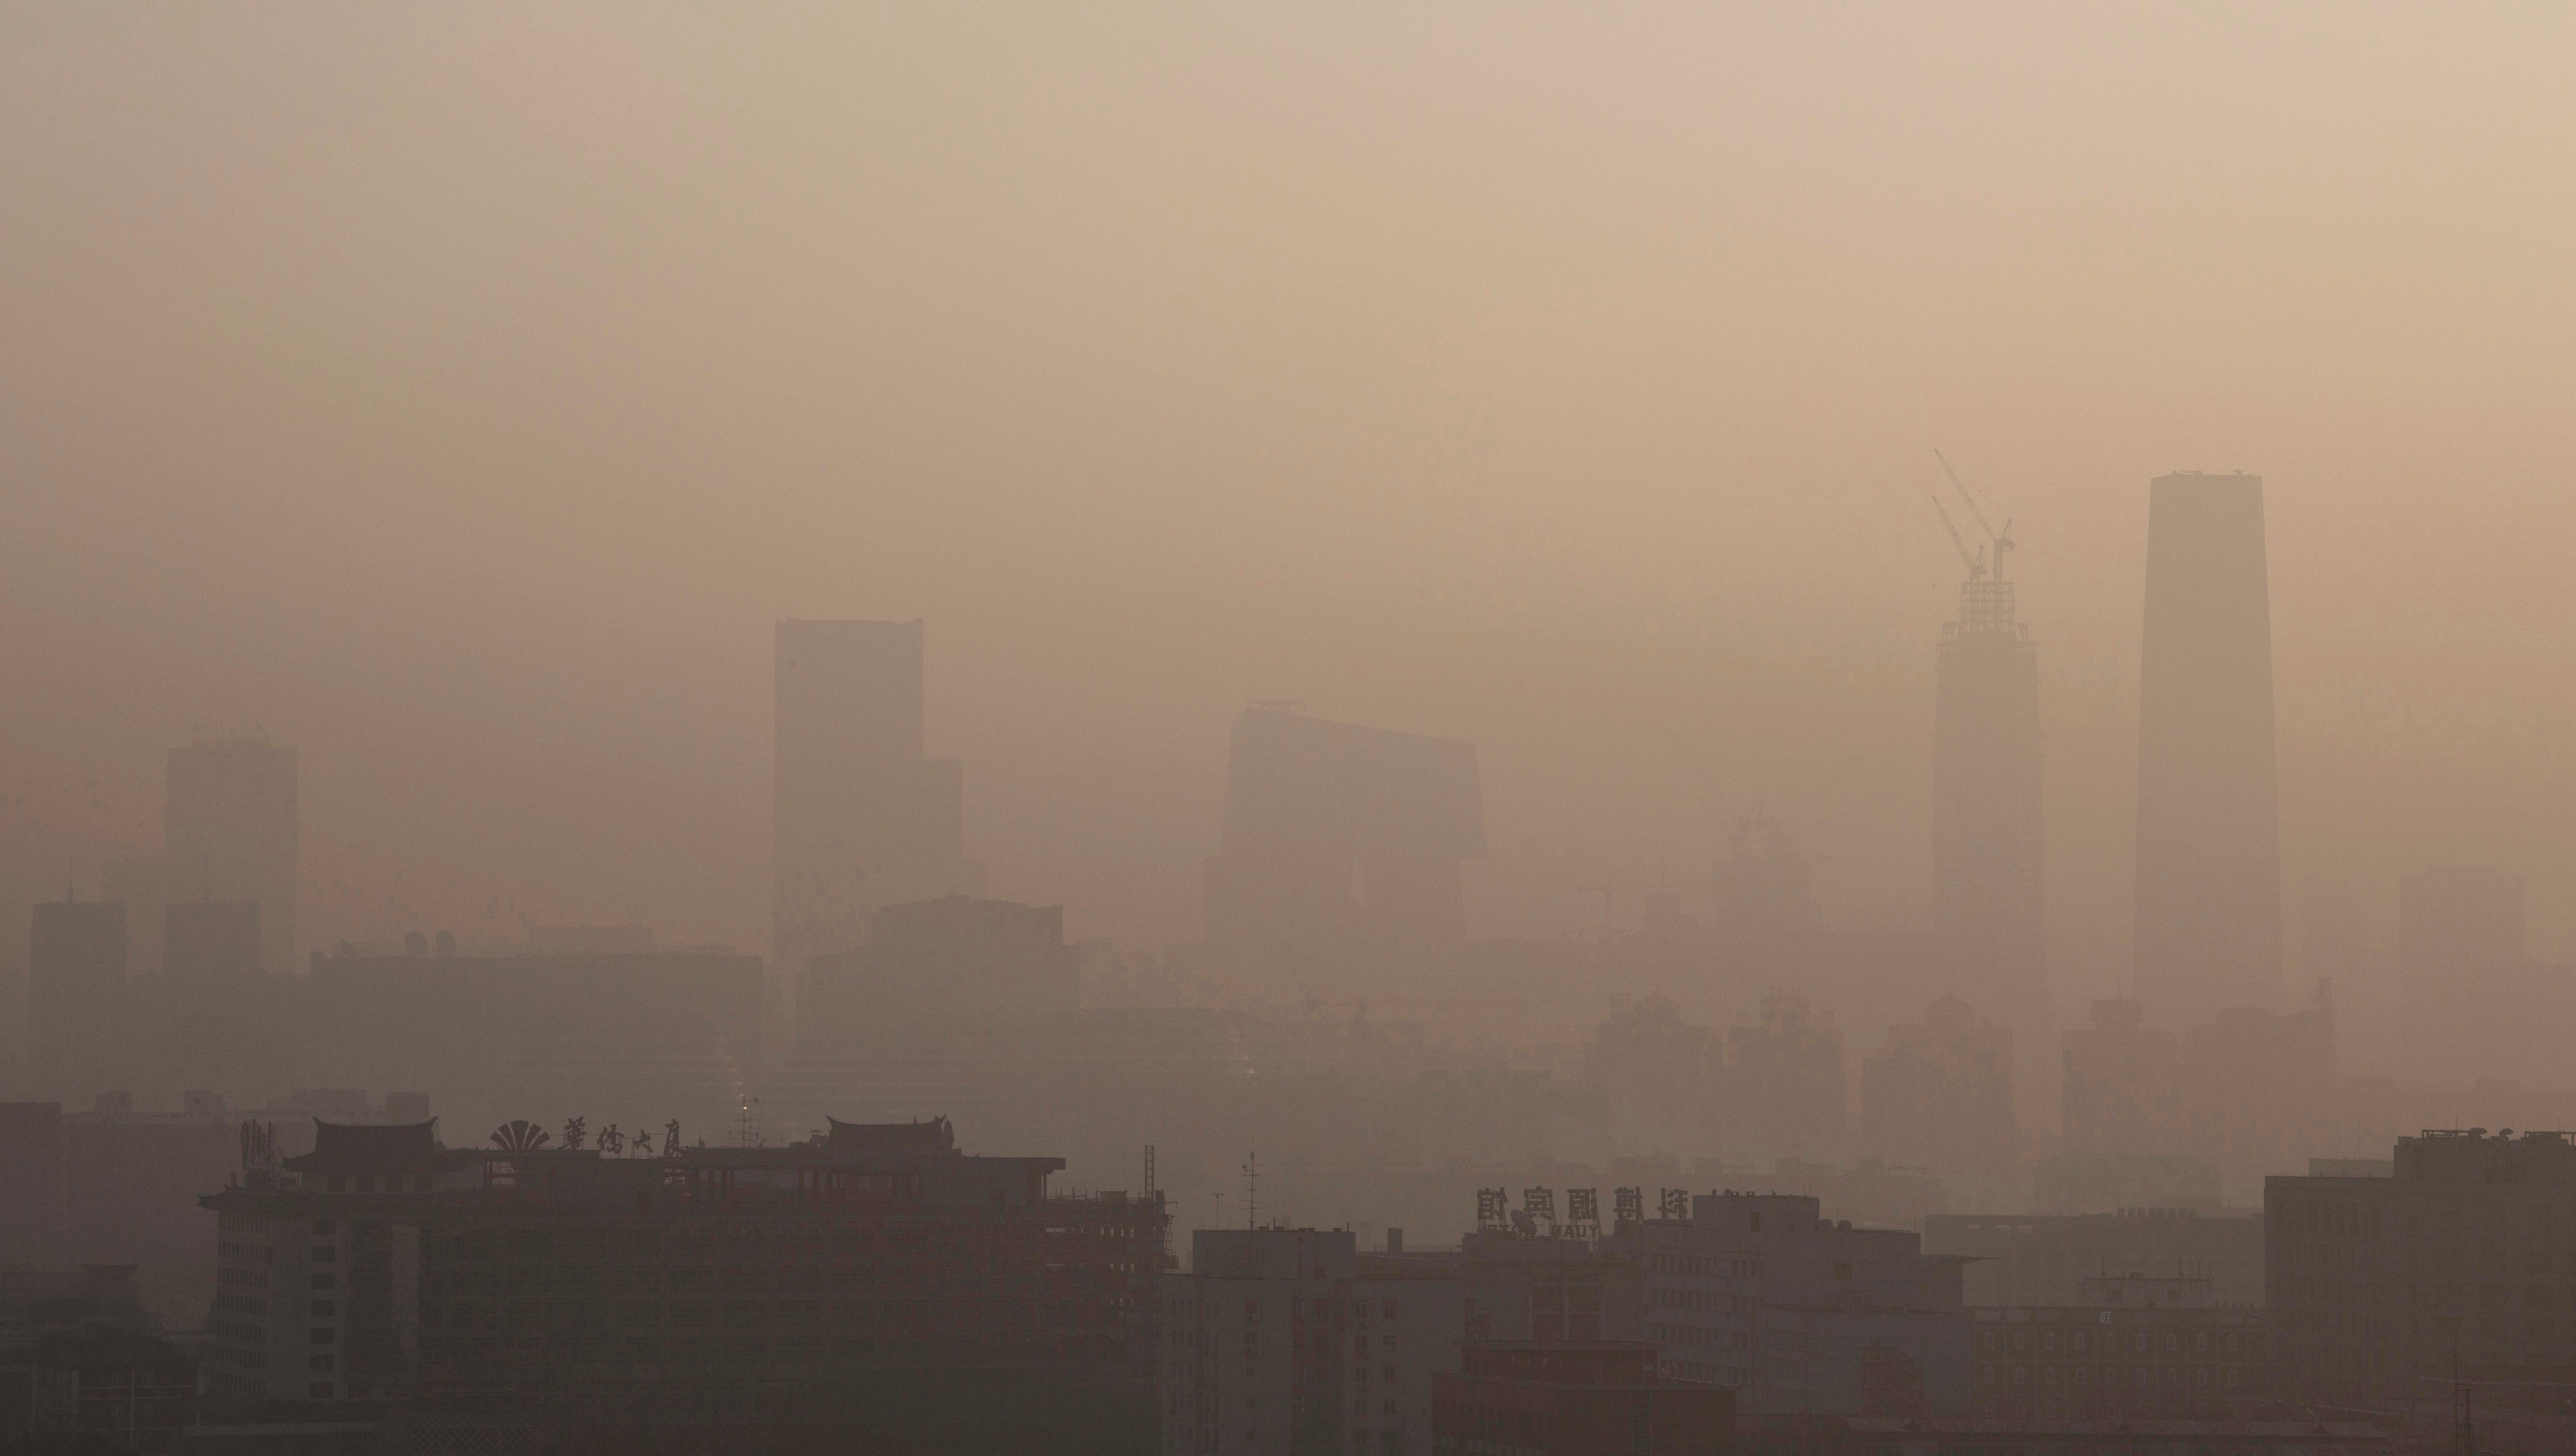 The skyline of Beijing under severe smog and pollution on Dec. 10, 2015 (Kevin Frayer—Getty Images)